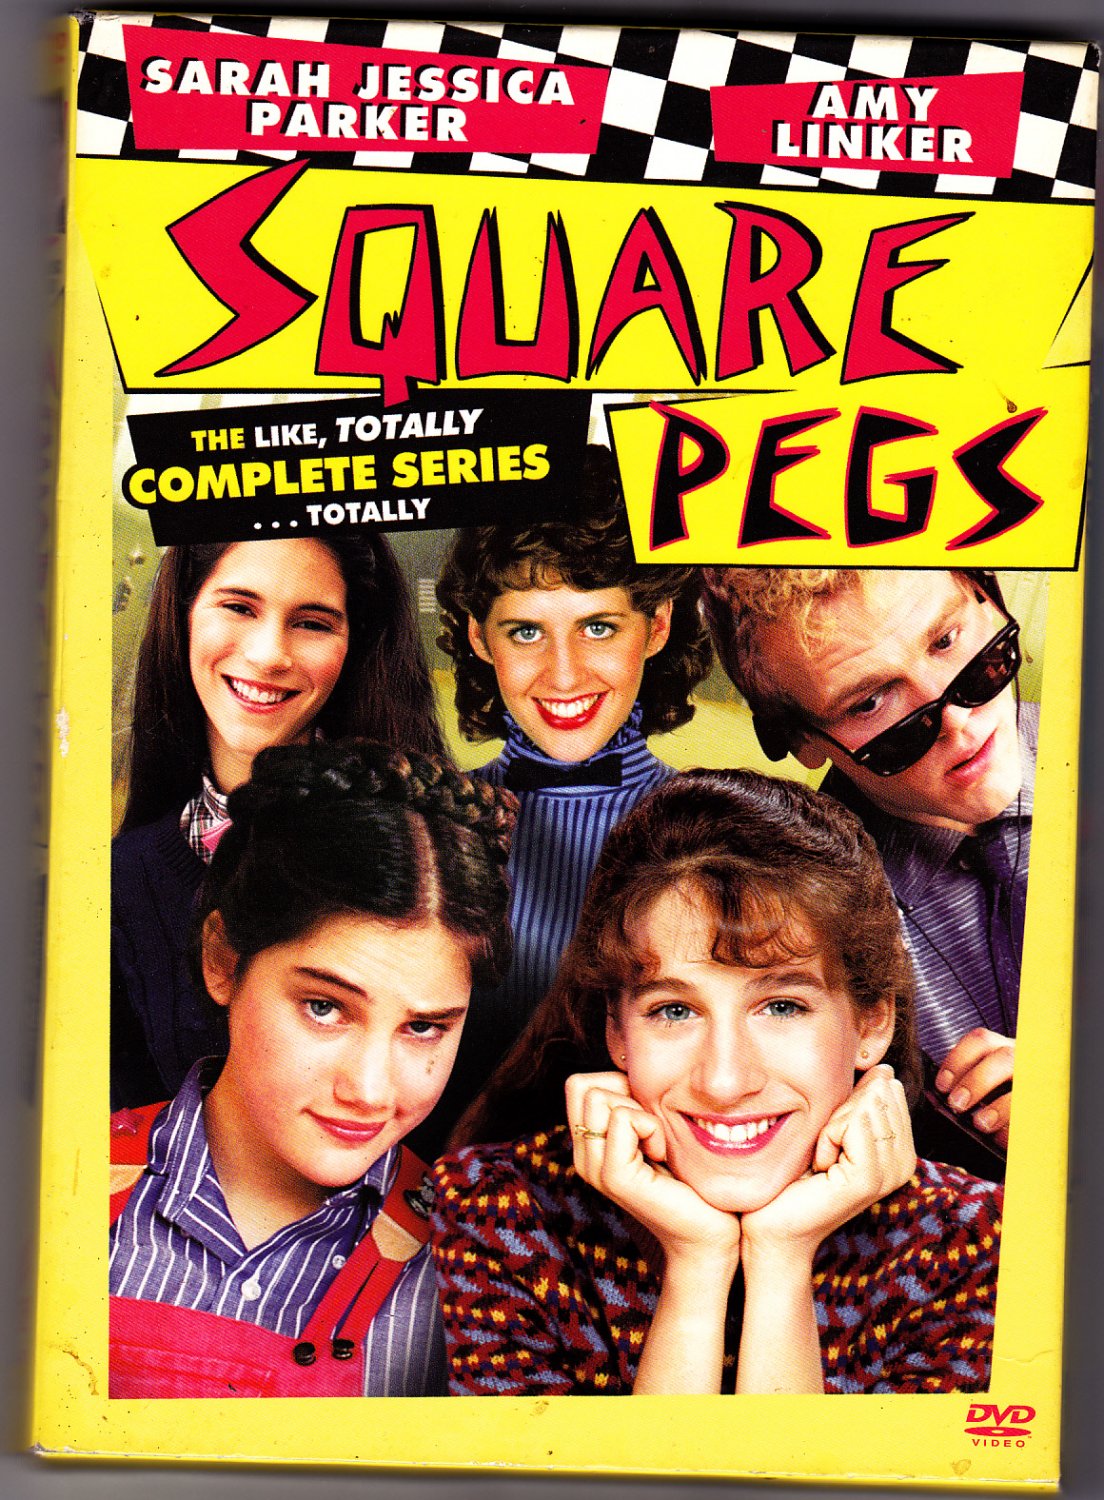 Square Pegs - The Complete Series DVD 2008 3-Disc Set - Very Good